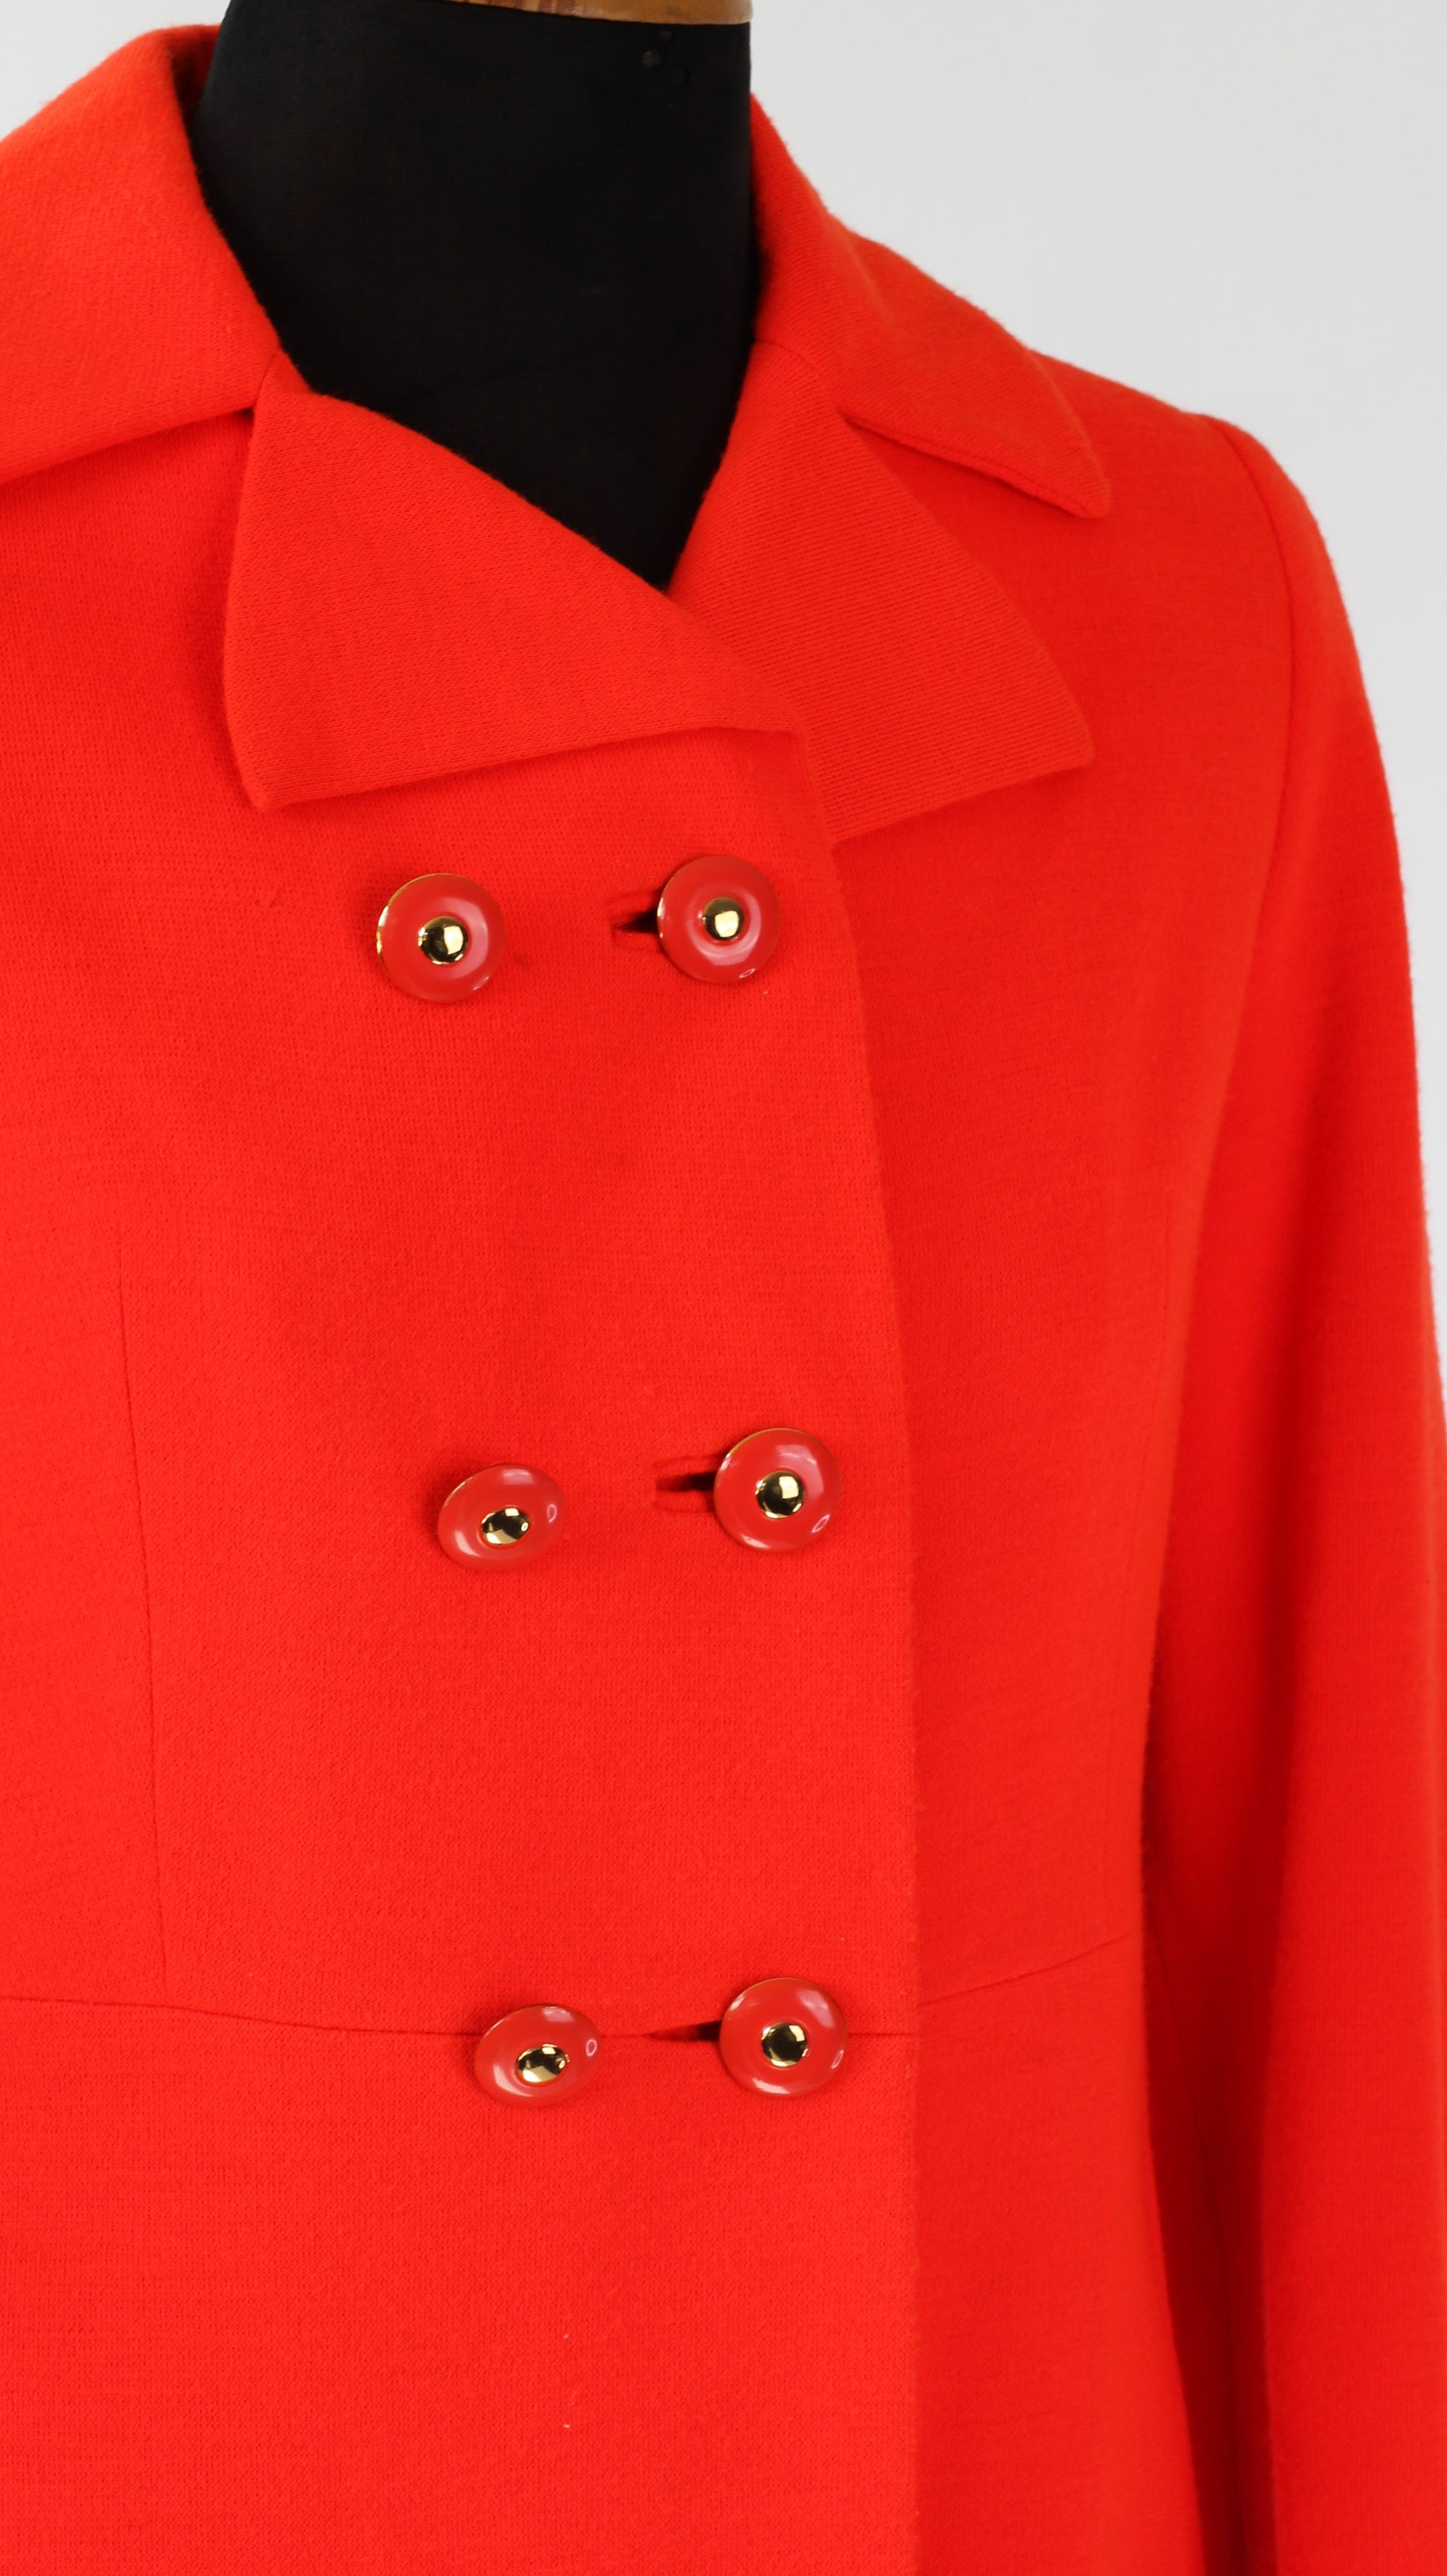 1960s Double Breasted Bright Orange Mod Coat/Red Coat//Size S/M